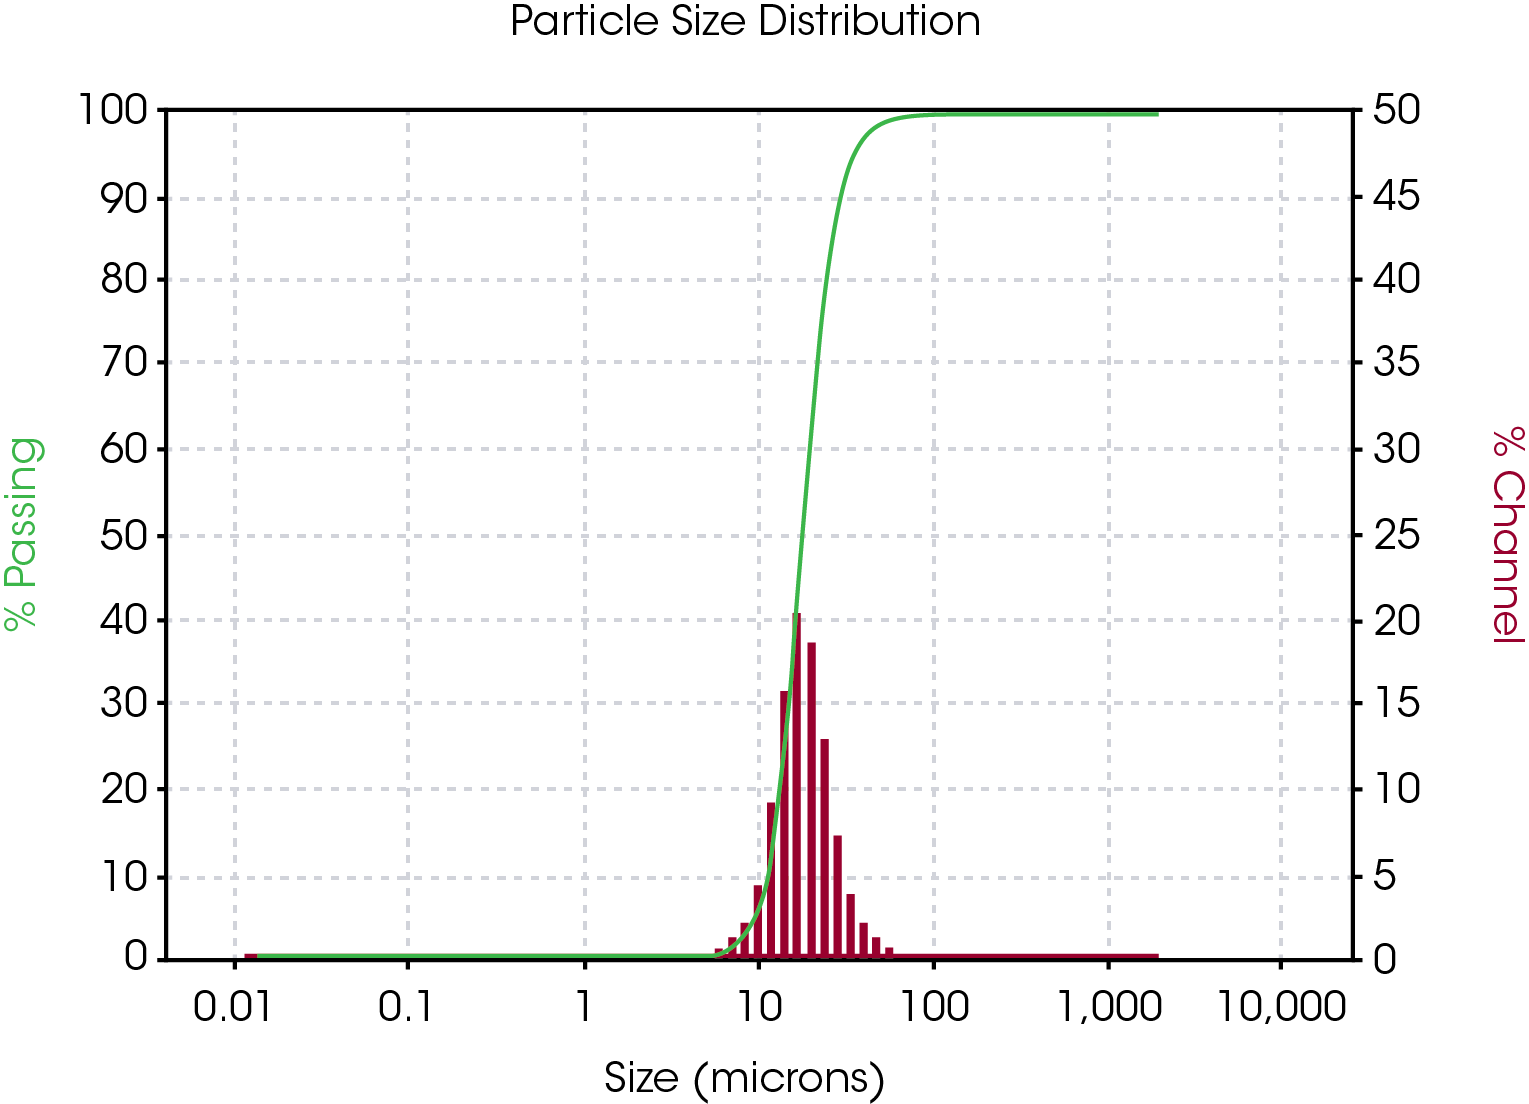 Figure 1. Example of a particle size distribution result for the NEI 03 natural graphite sample.